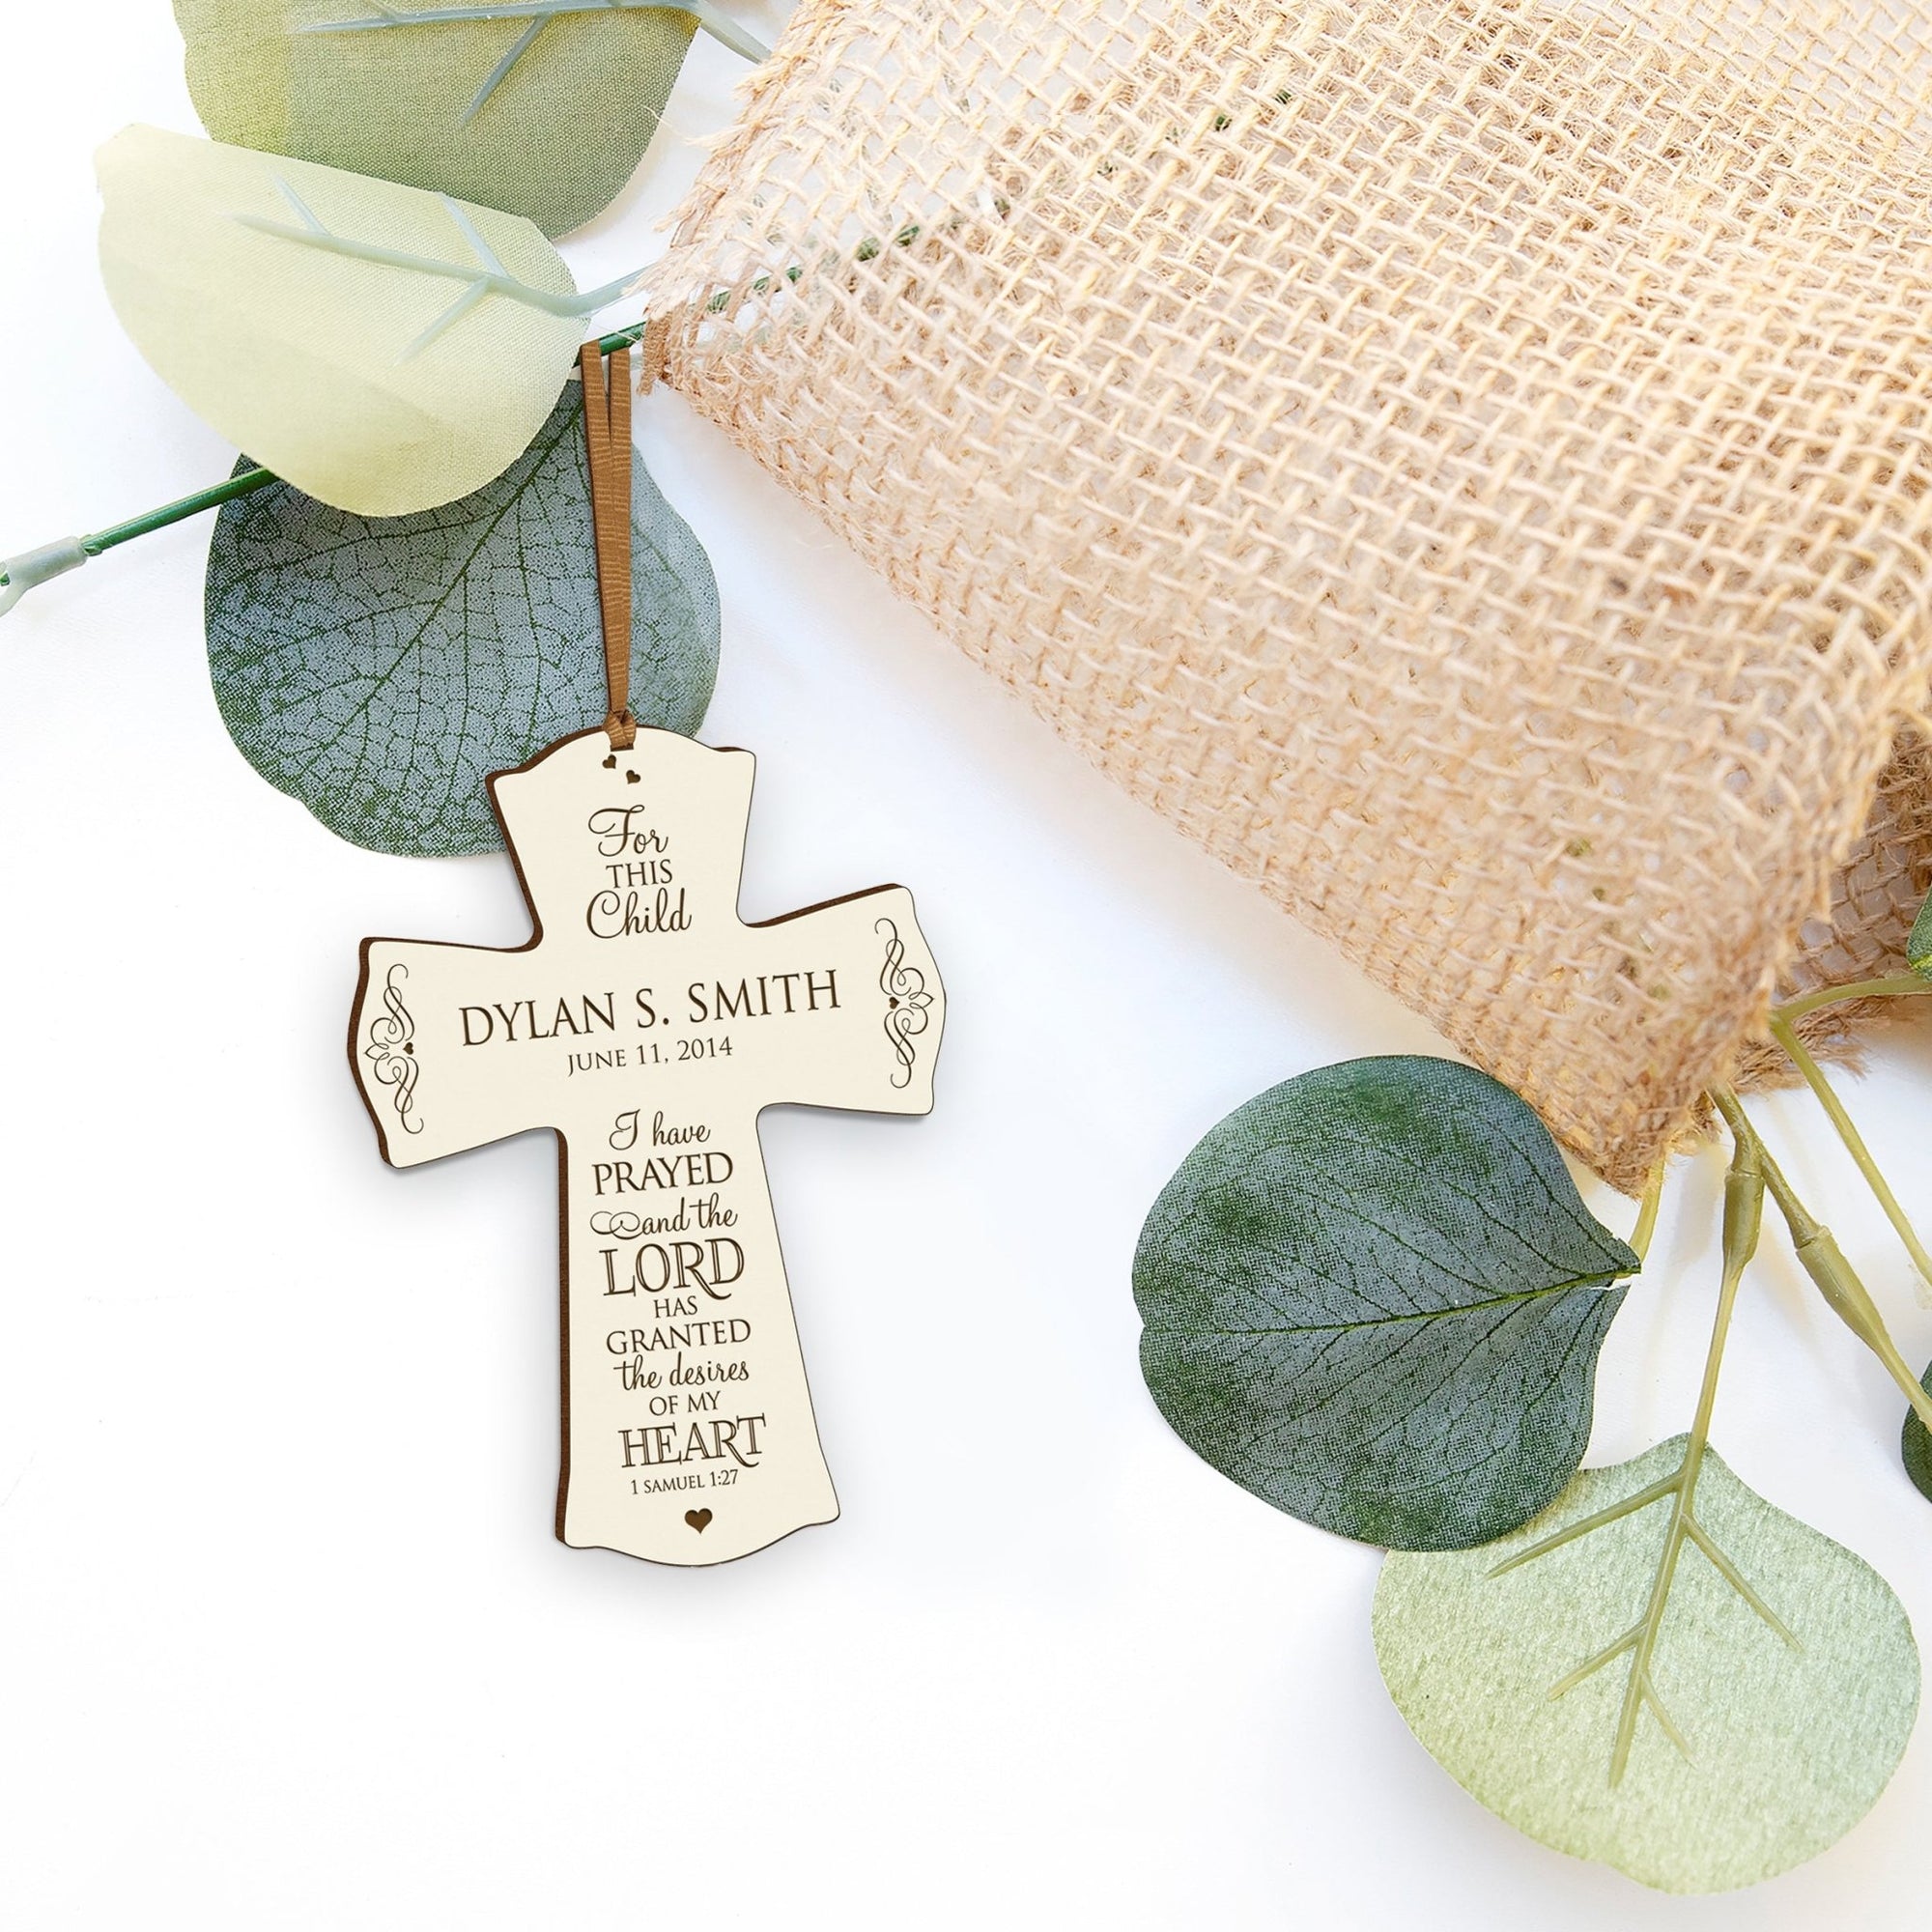 Personalized Baptism Wall Cross for Christening - 1 Samuel 1:27 - LifeSong Milestones